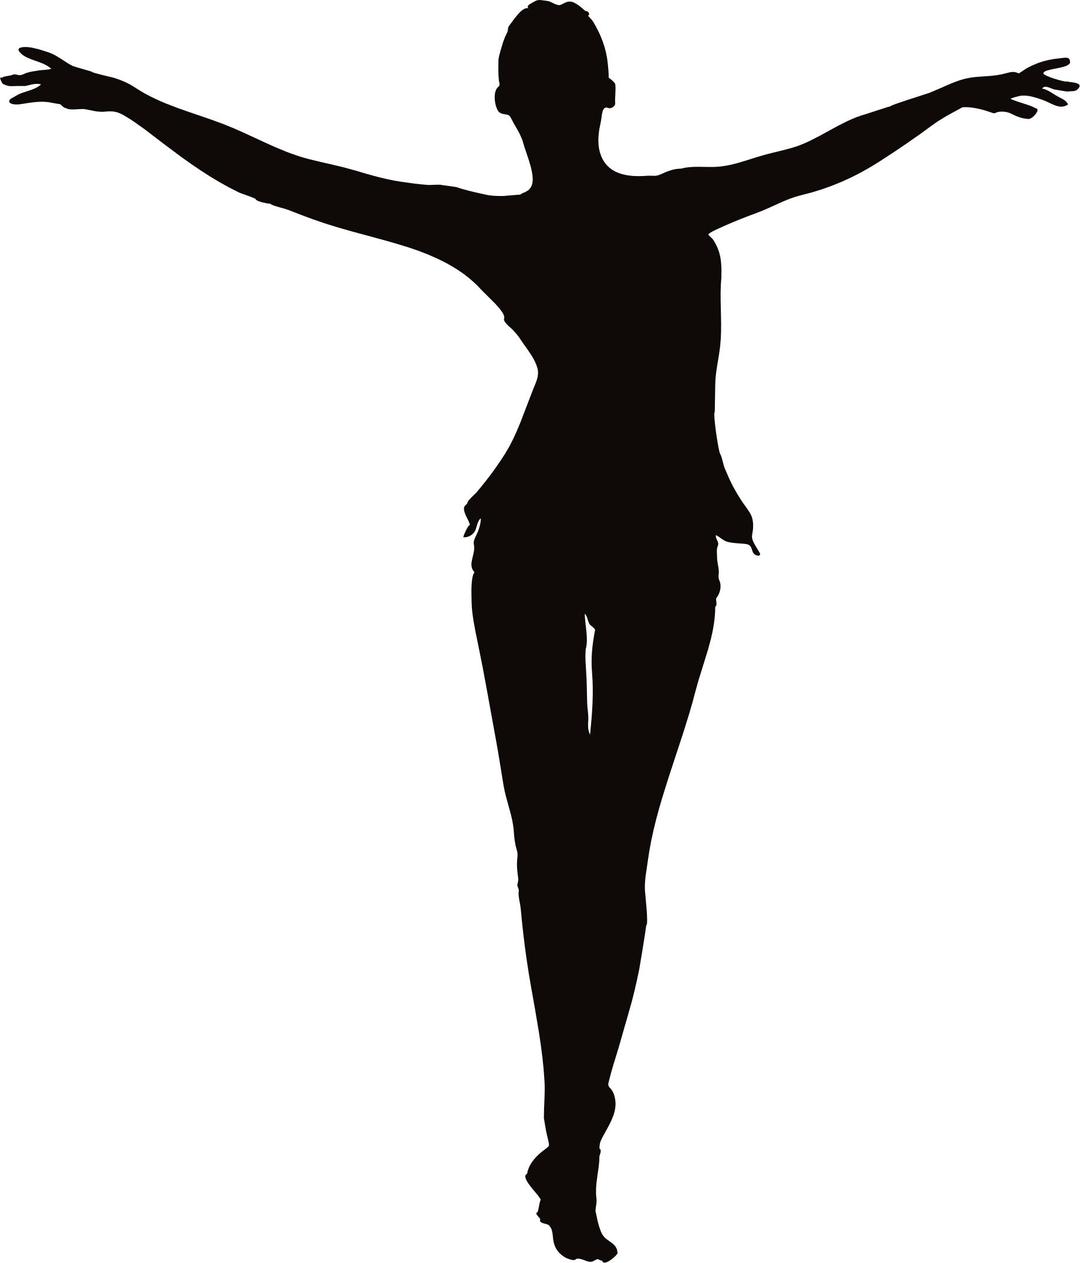 Woman With Outstretched Arms Silhouette png transparent